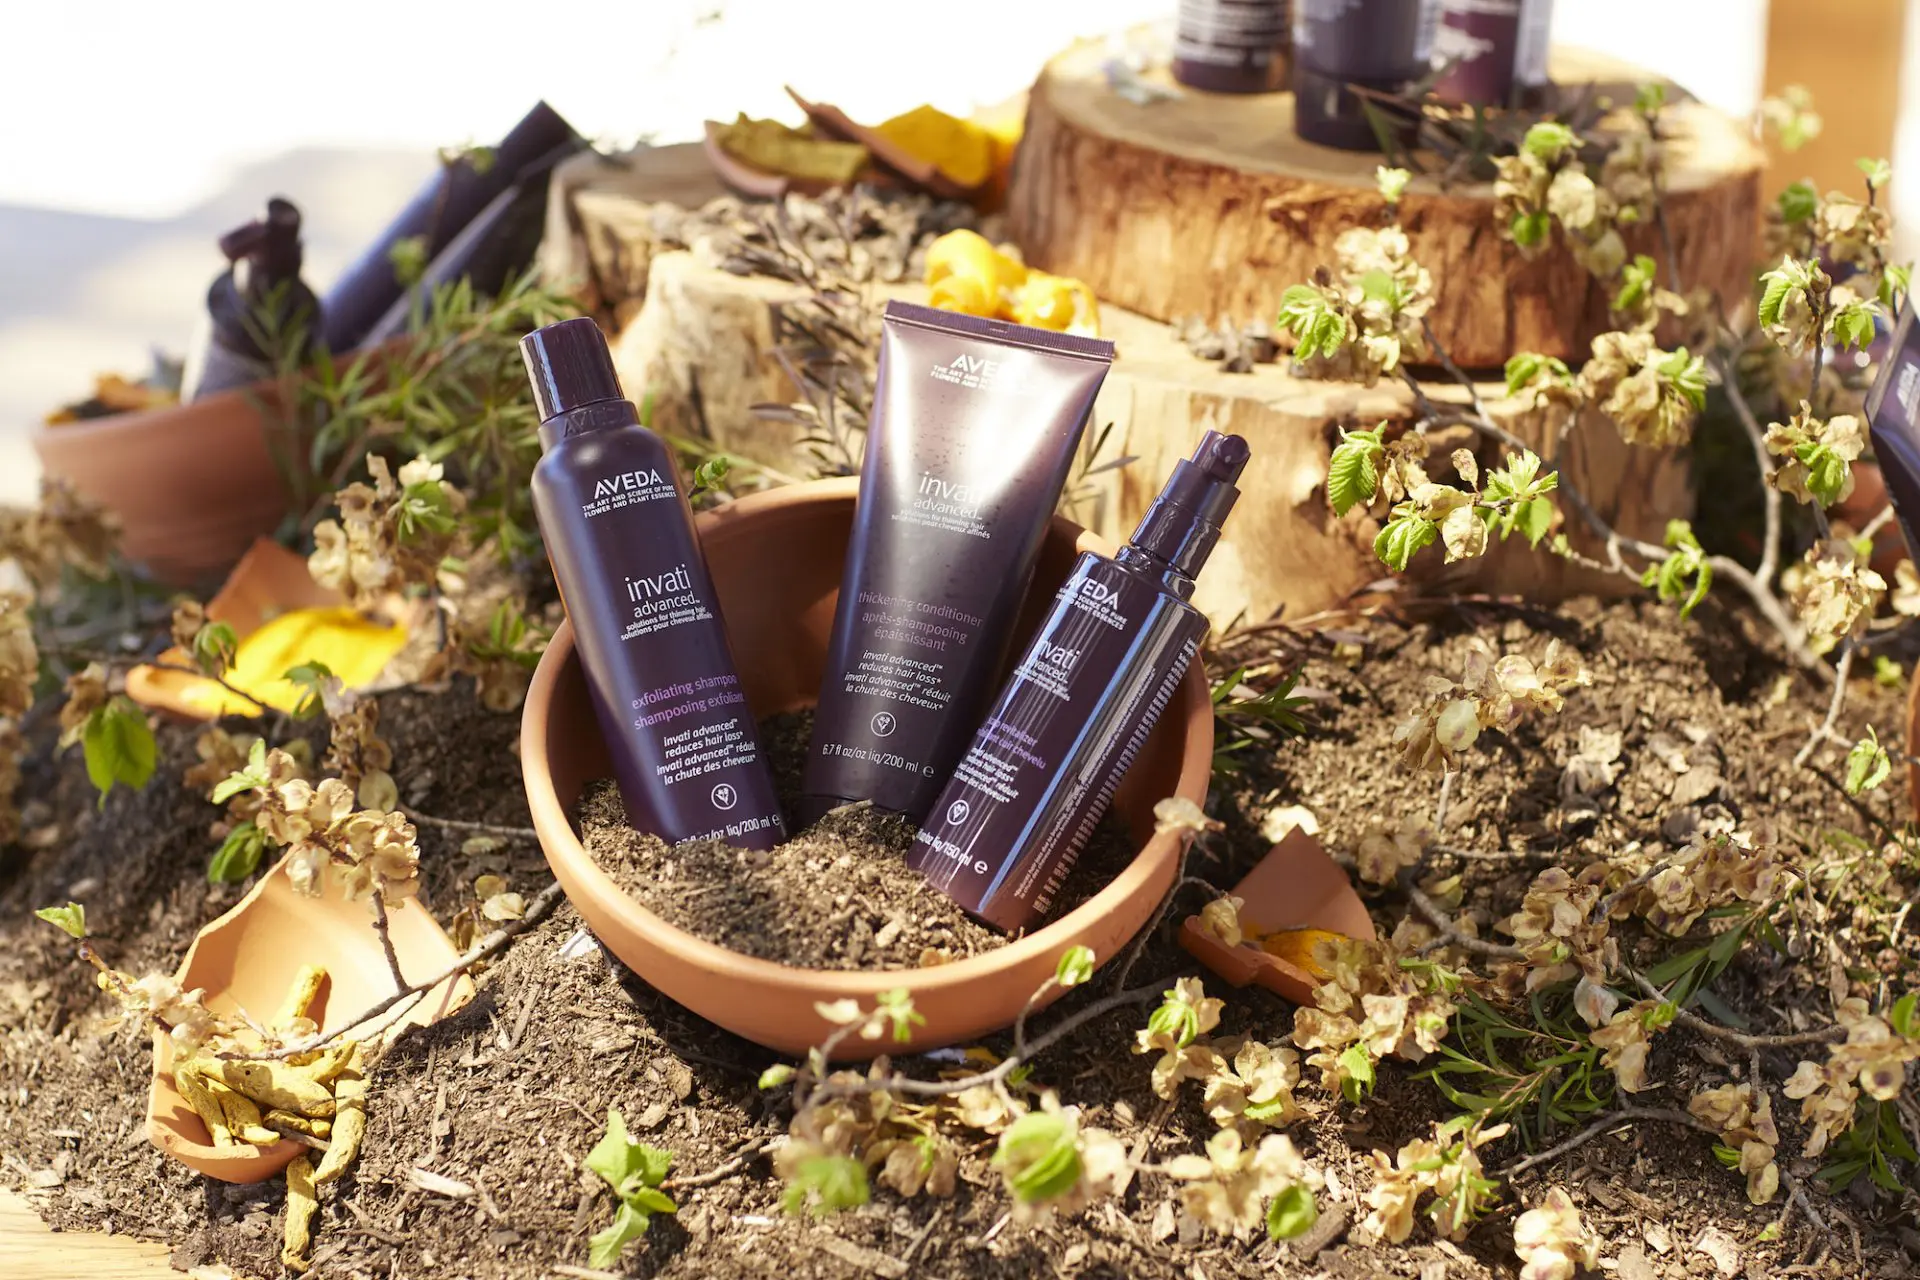 Product styling for hair care brand Aveda by Rainy Sunday